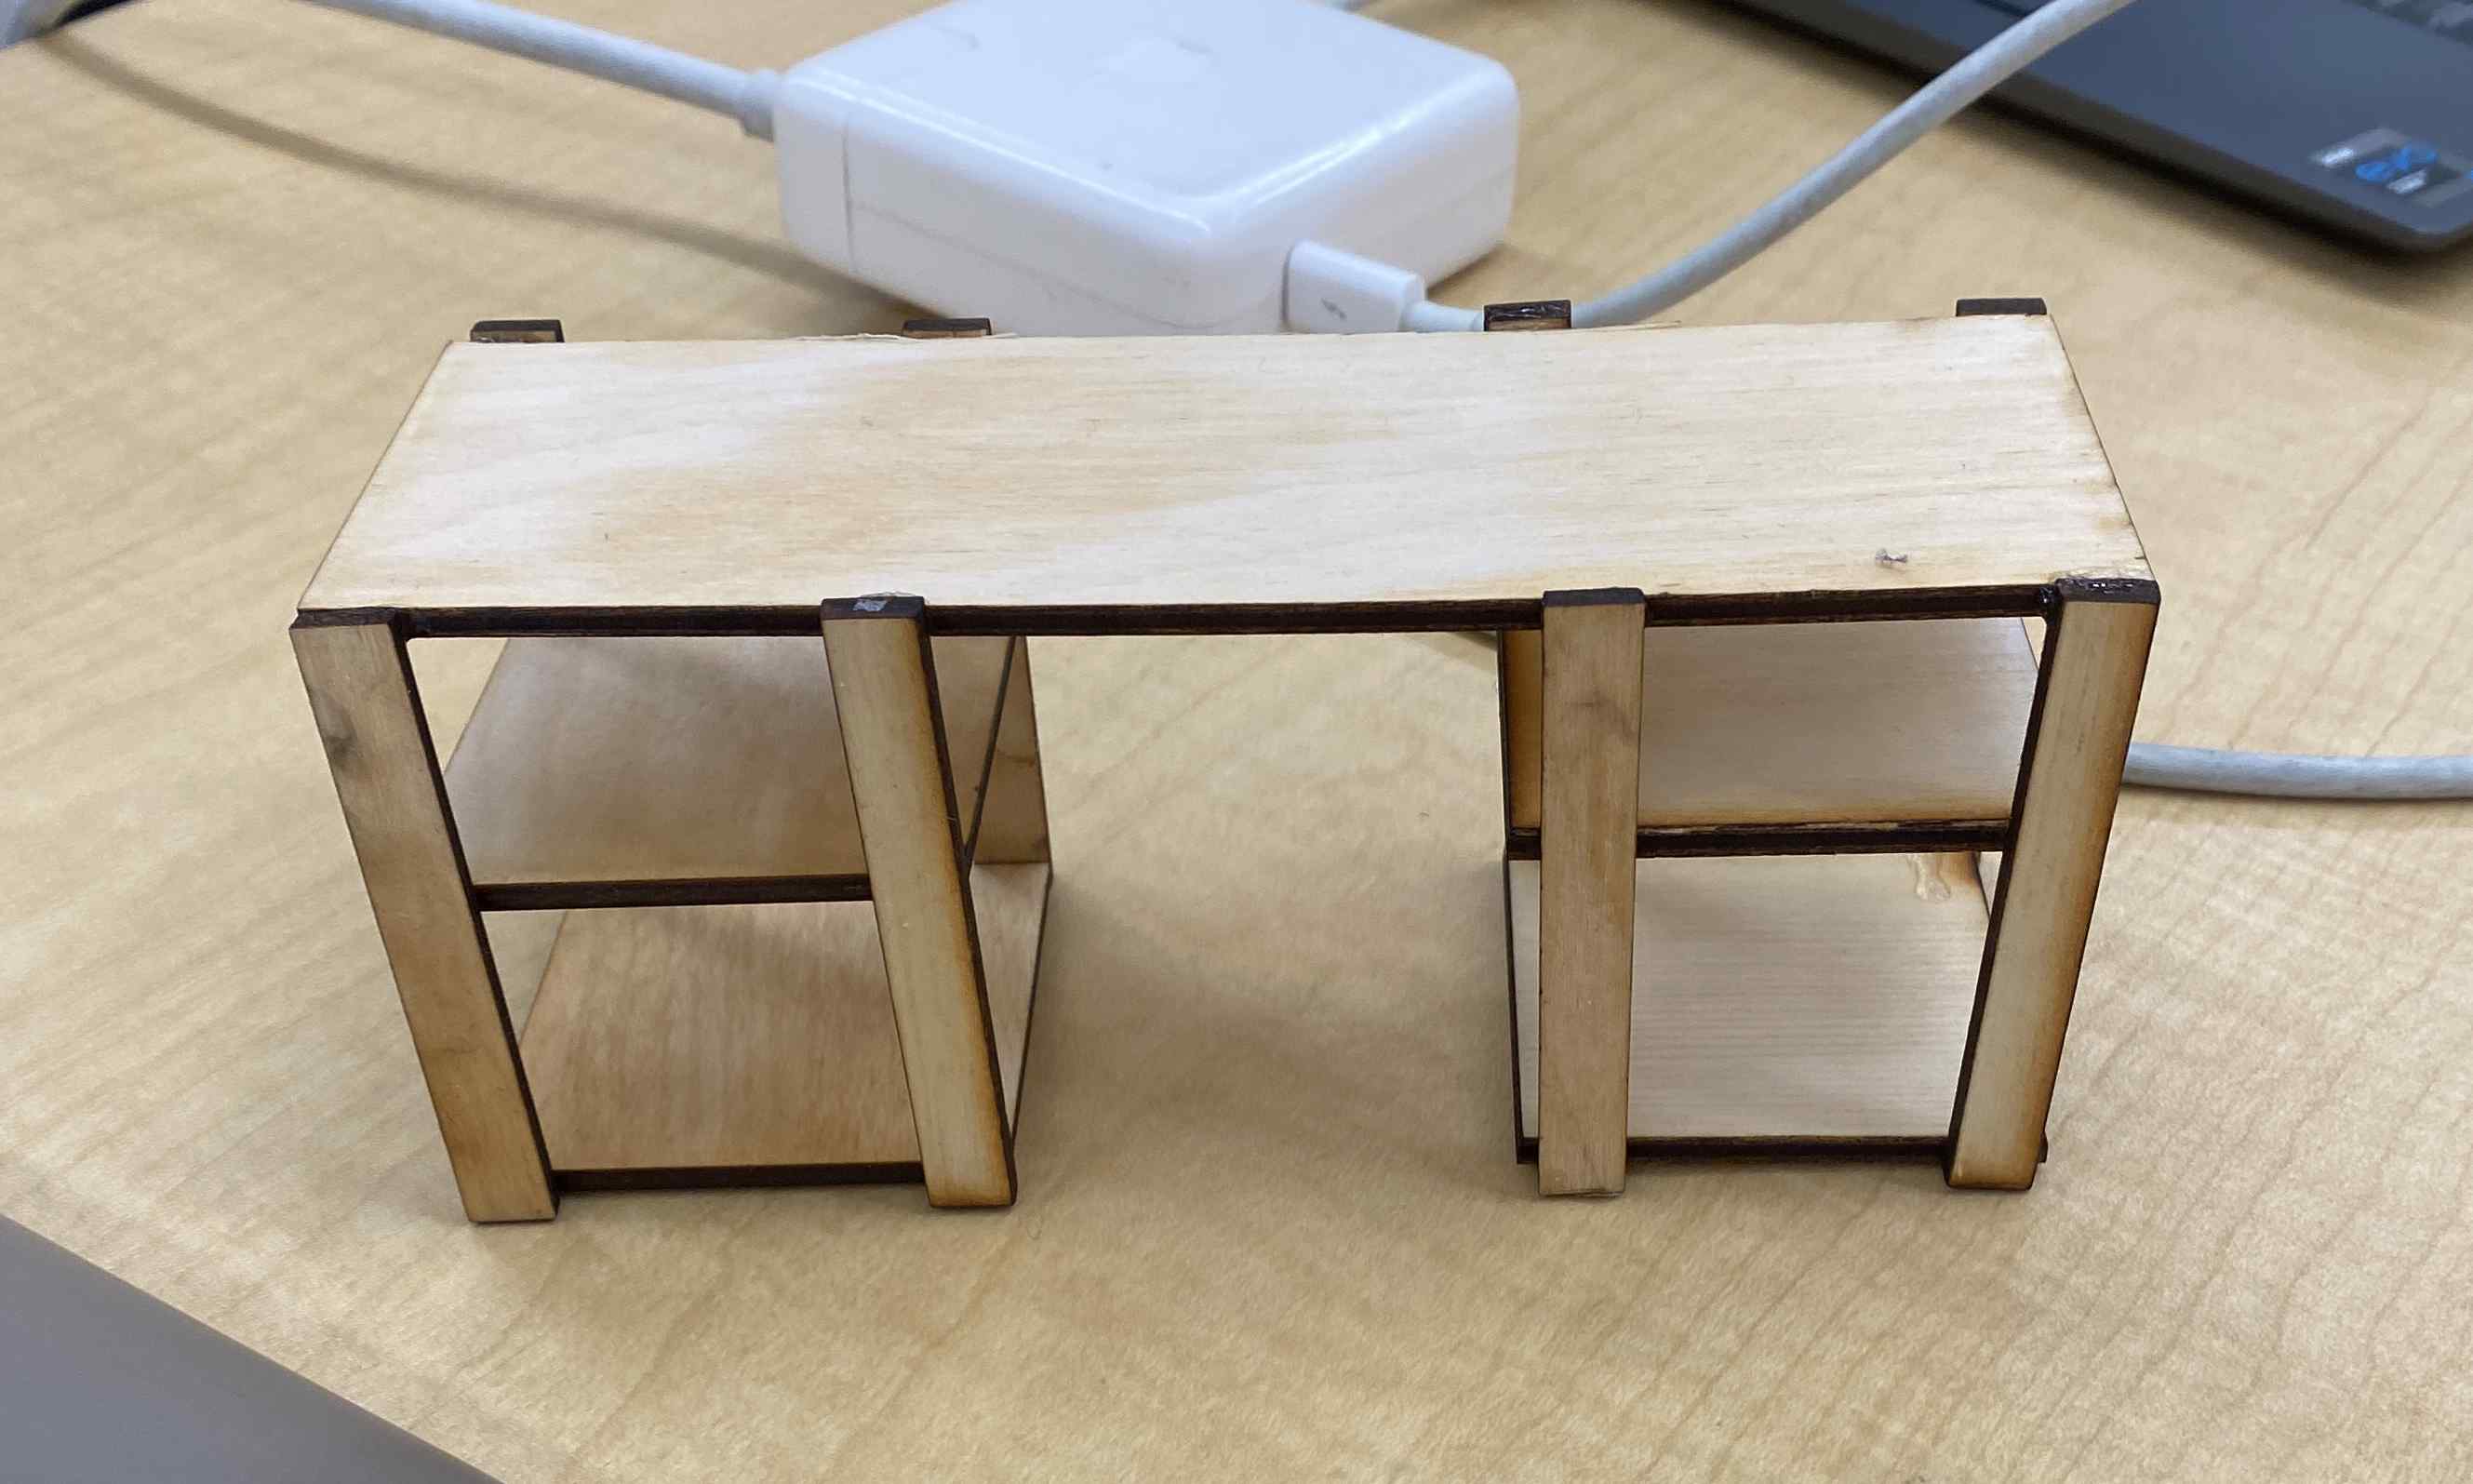 We laser cut wood to make a small model of the desk